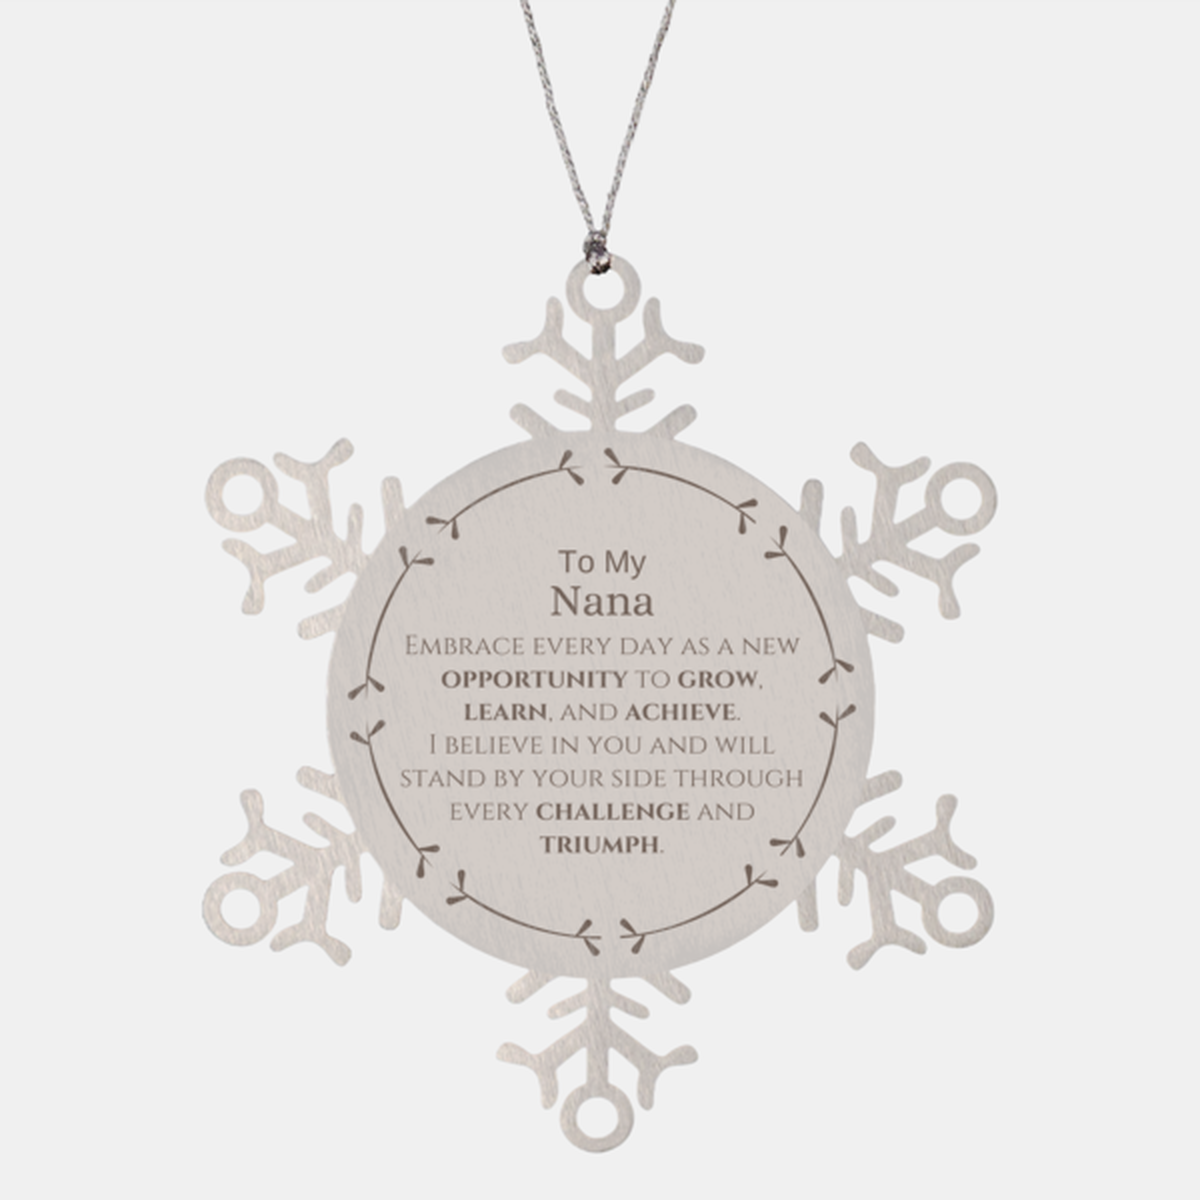 To My Nana Gifts, I believe in you and will stand by your side, Inspirational Snowflake Ornament For Nana, Birthday Christmas Motivational Nana Gifts